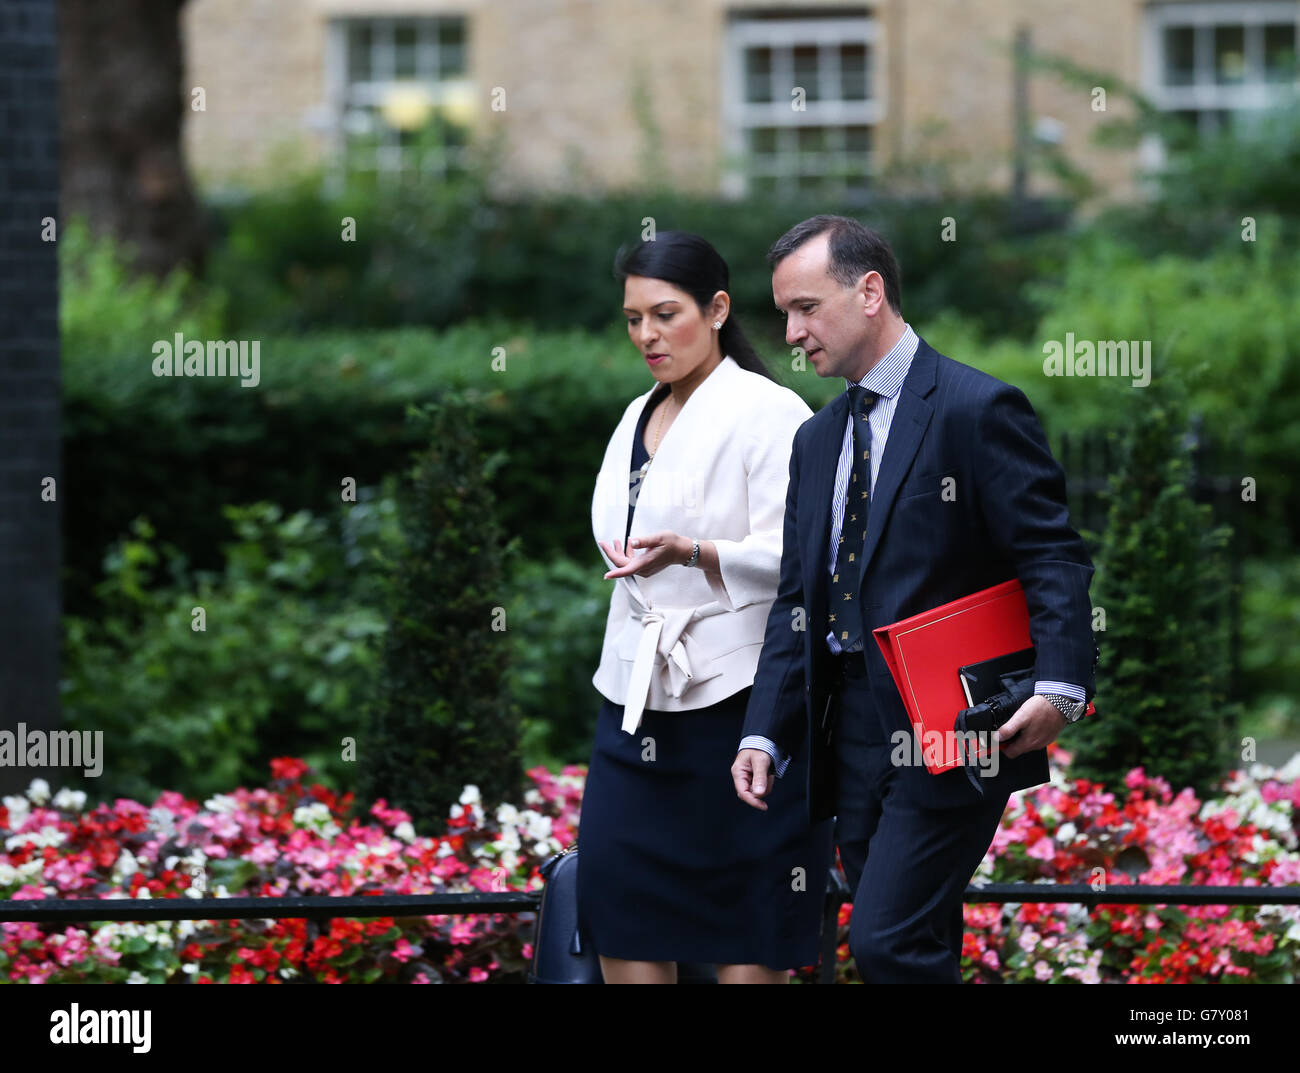 London, Britain. 27th June, 2016. Priti Patel (L), Minister of State for Employment, and Alun Cairns, Secretary of State for Wales, arrive for a cabinet meeting at 10 Downing Street in London, Britain, June 27, 2016. British Prime Minister David Cameron chaired an emergency cabinet meeting on Monday morning, after Britain had voted to leave the European Union. Credit:  Han Yan/Xinhua/Alamy Live News Stock Photo